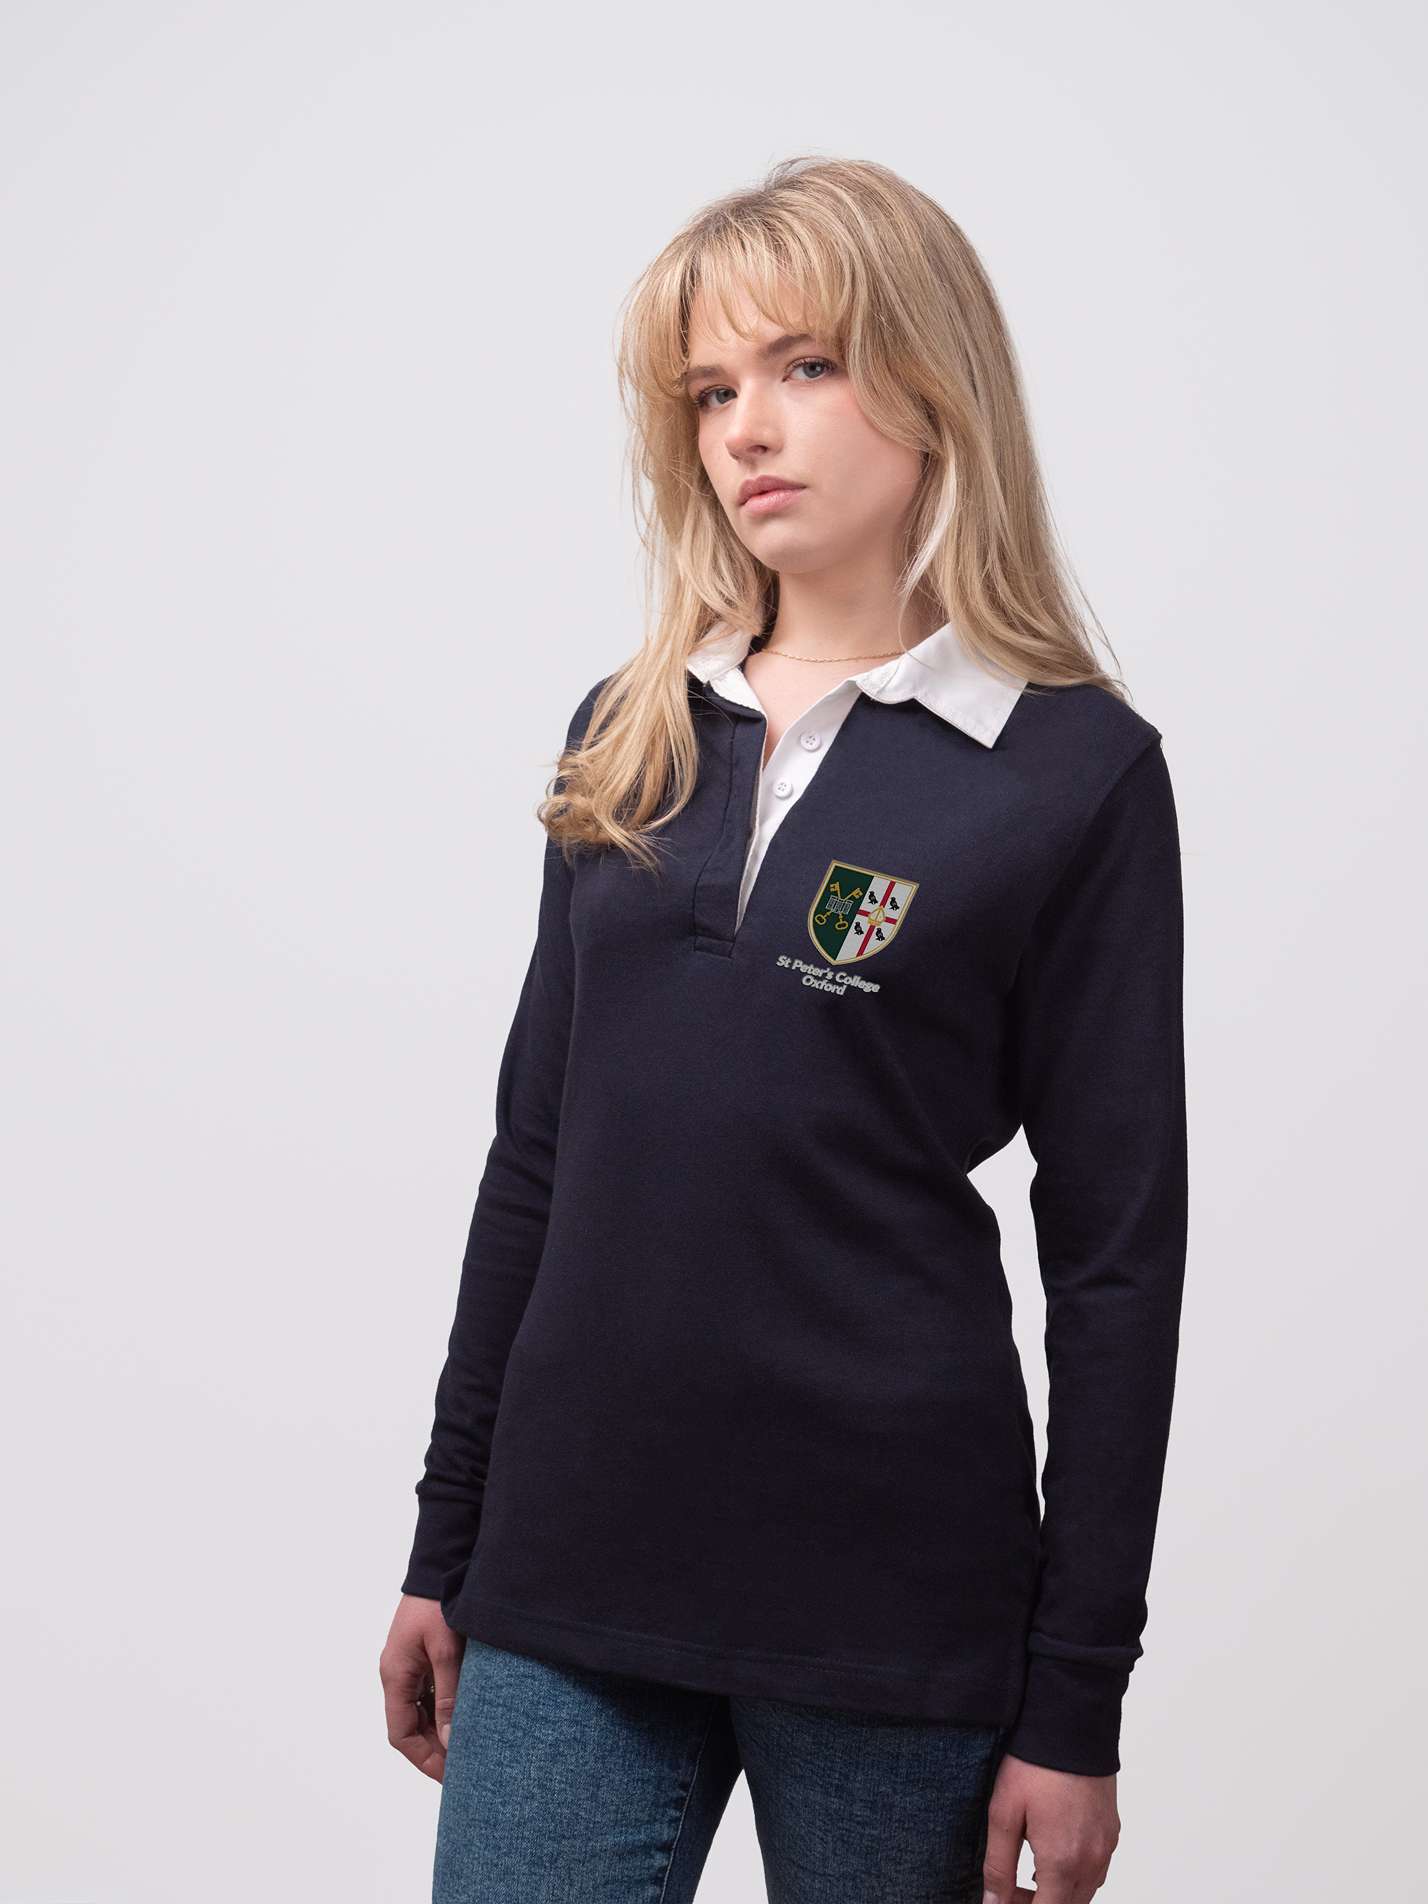 Student wearing a navy St Peter's College rugby shirt with embroidered crest